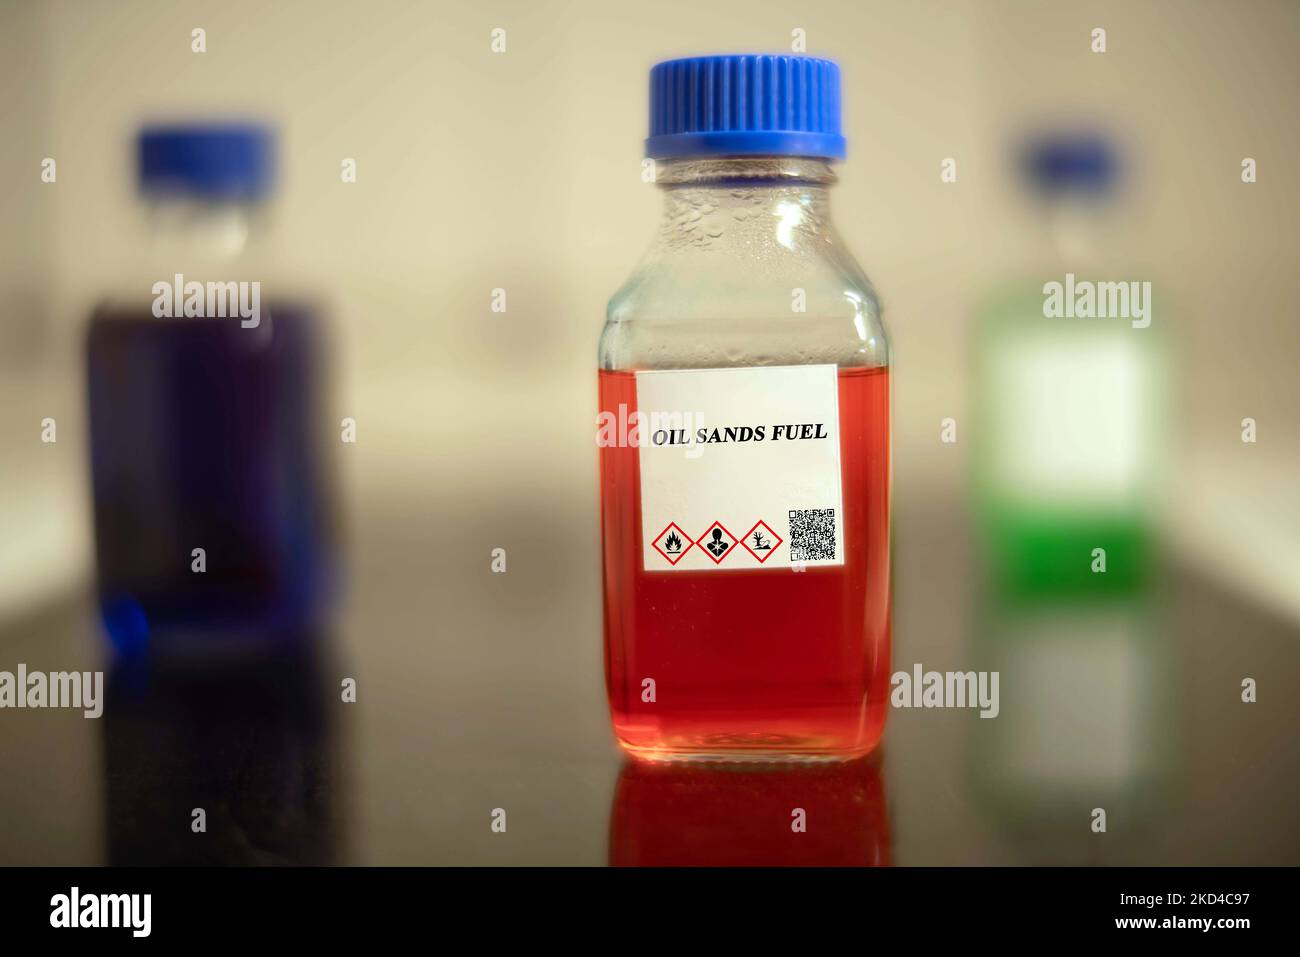 Glass bottle of oil sands fuel Stock Photo - Alamy